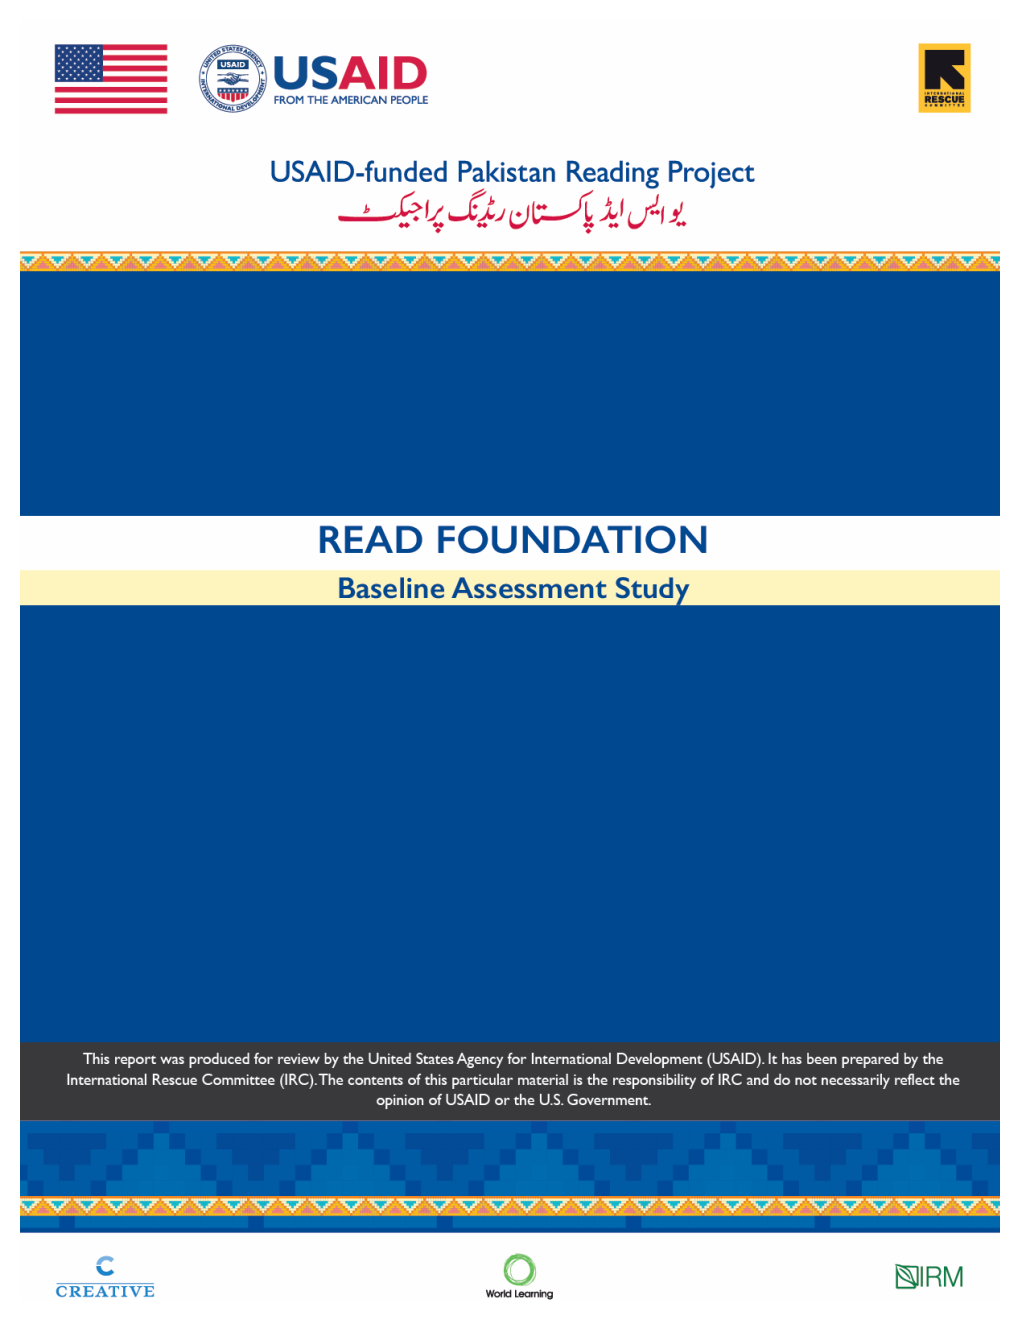 USAID-Funded Pakistan Reading Project 1 READ FOUNDATION - Baseline Assessment Study